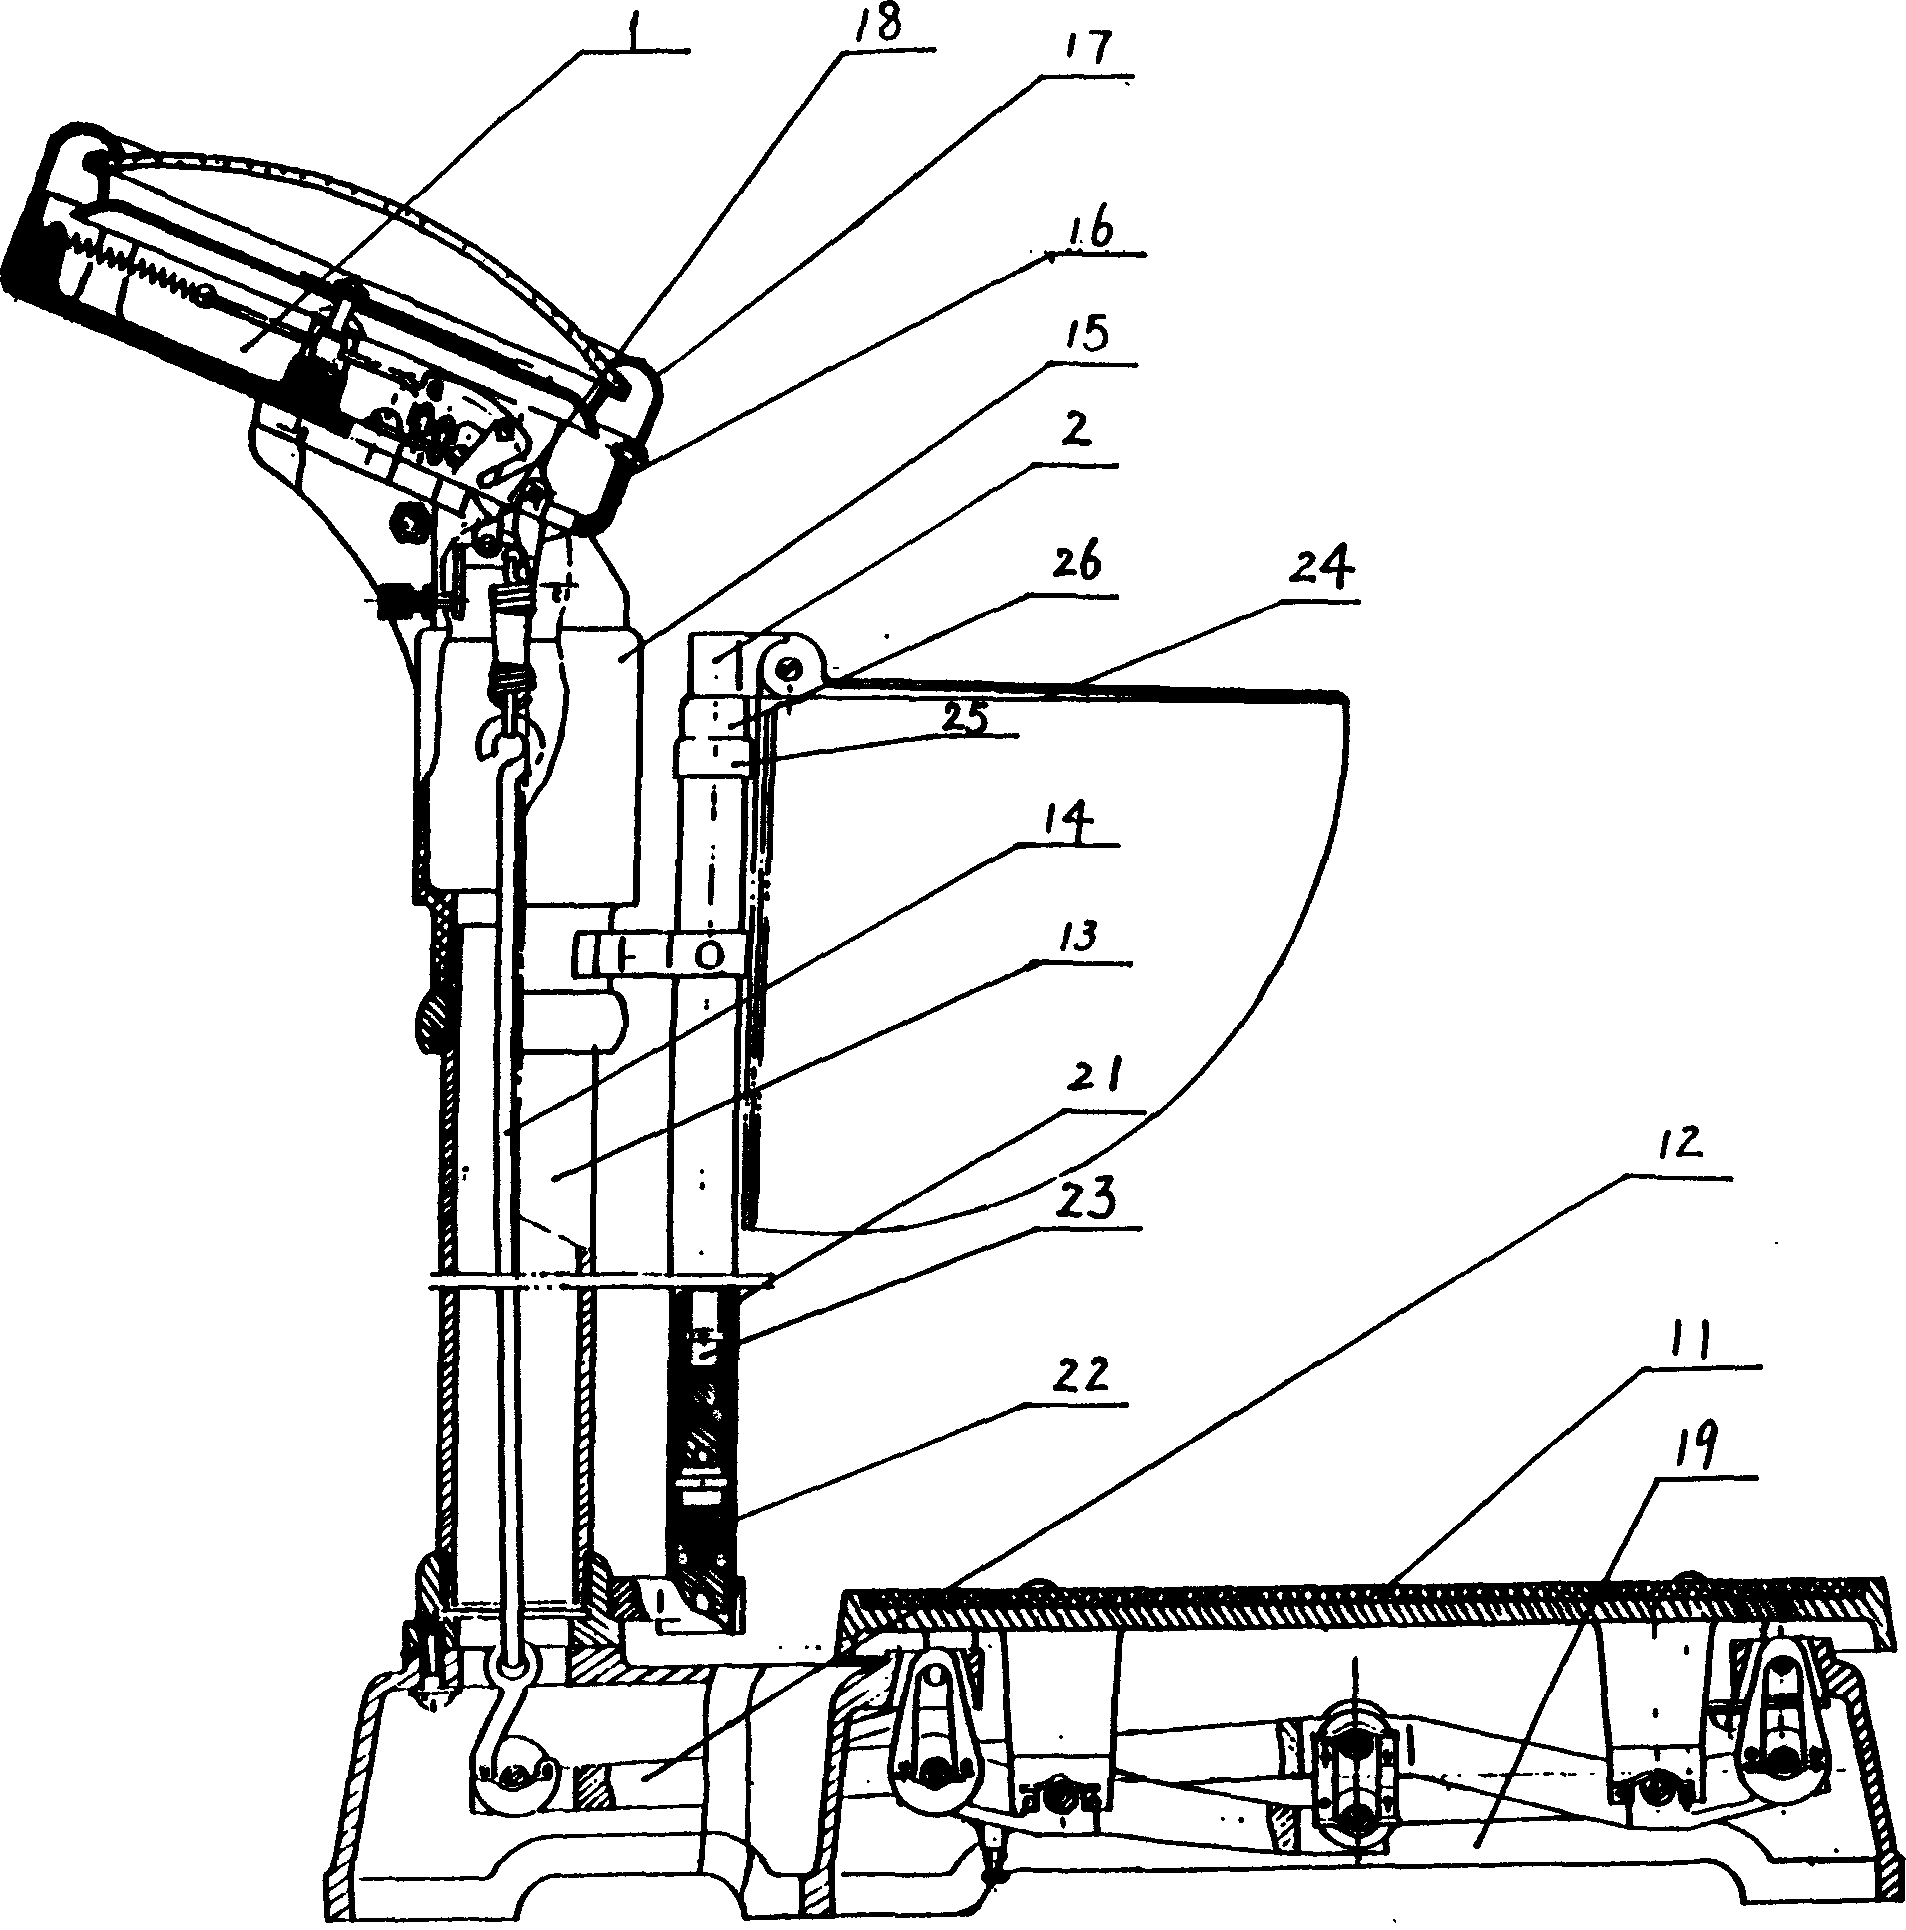 Body weight and body height measuring apparatus